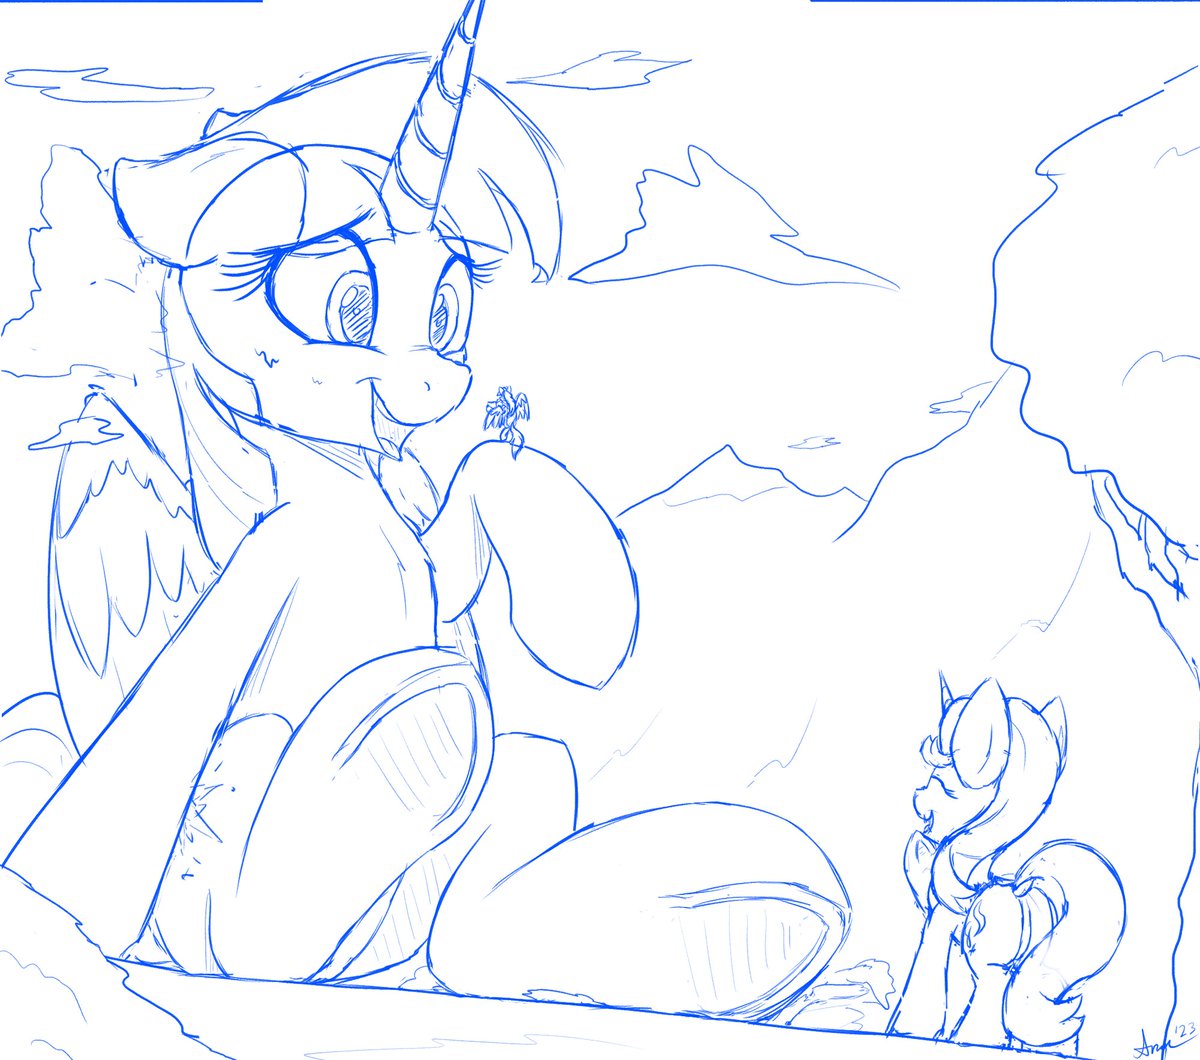 Twilight may have gone a bit overboard with that size spell. Bit off a bit more than I could chew with this one, so just a sketch for today. 
ATG Day 19: Draw a pony daydreaming / Draw a pony with their head in the clouds.